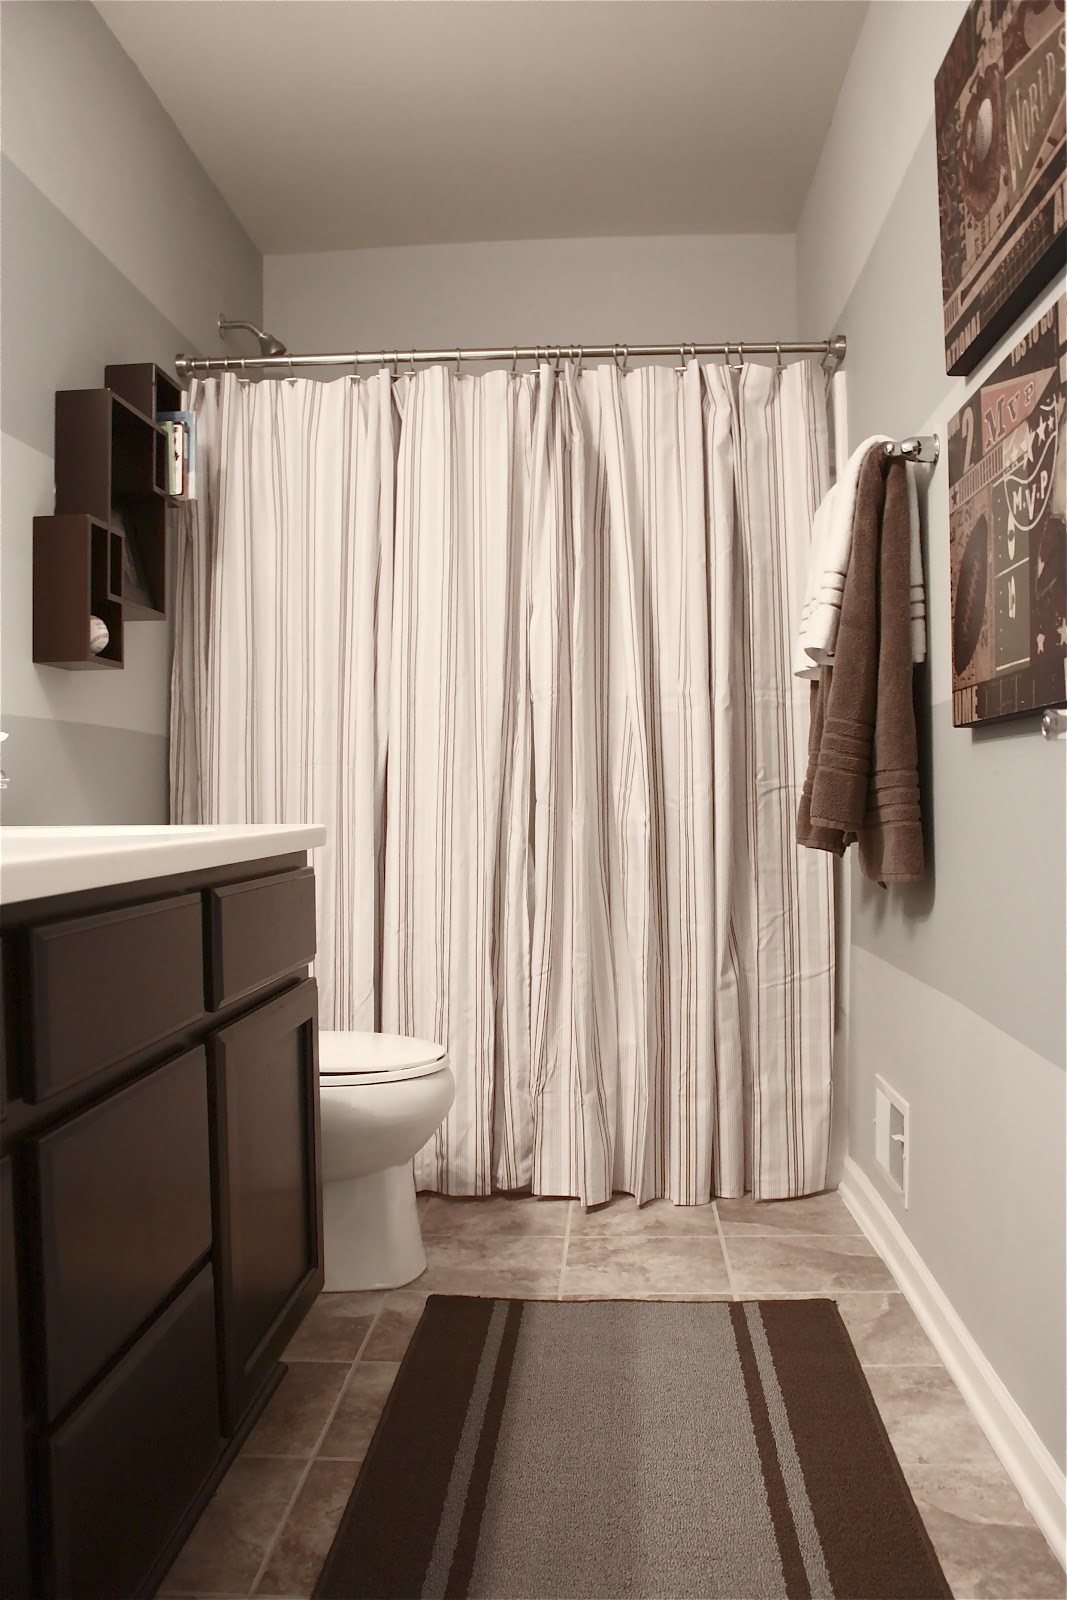 Bathroom Shower Curtains
 The Yellow Cape Cod Boy s Bathroom Reveal Using Two